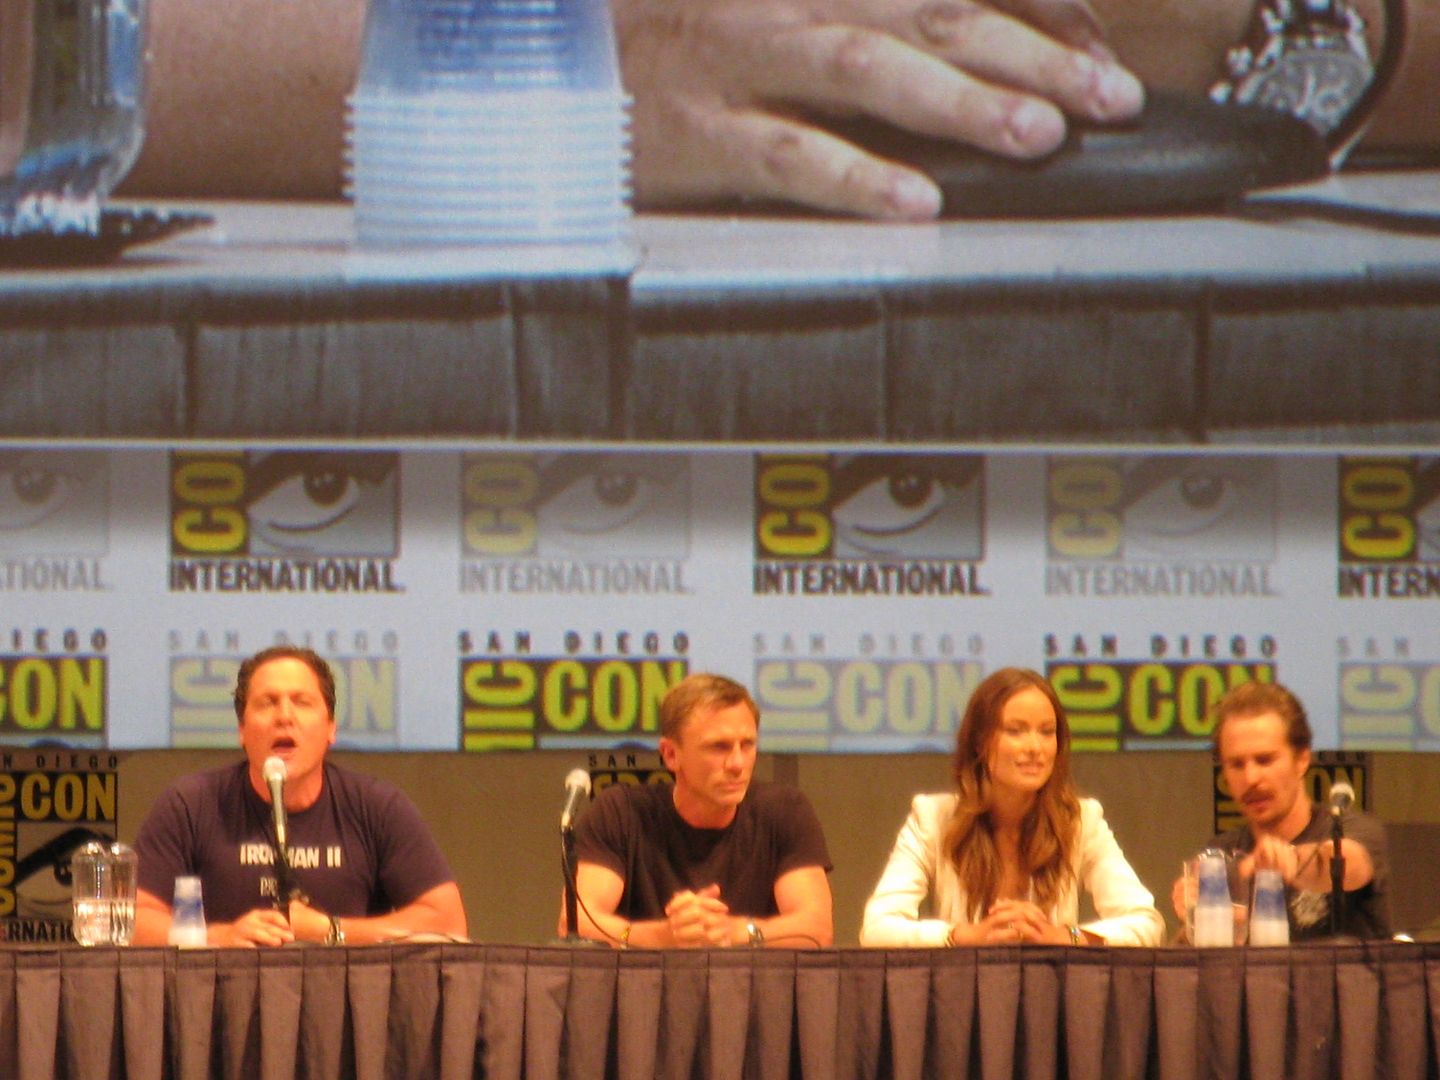 Cowboys and Aliens Panel at Comic Con - San Diego, California